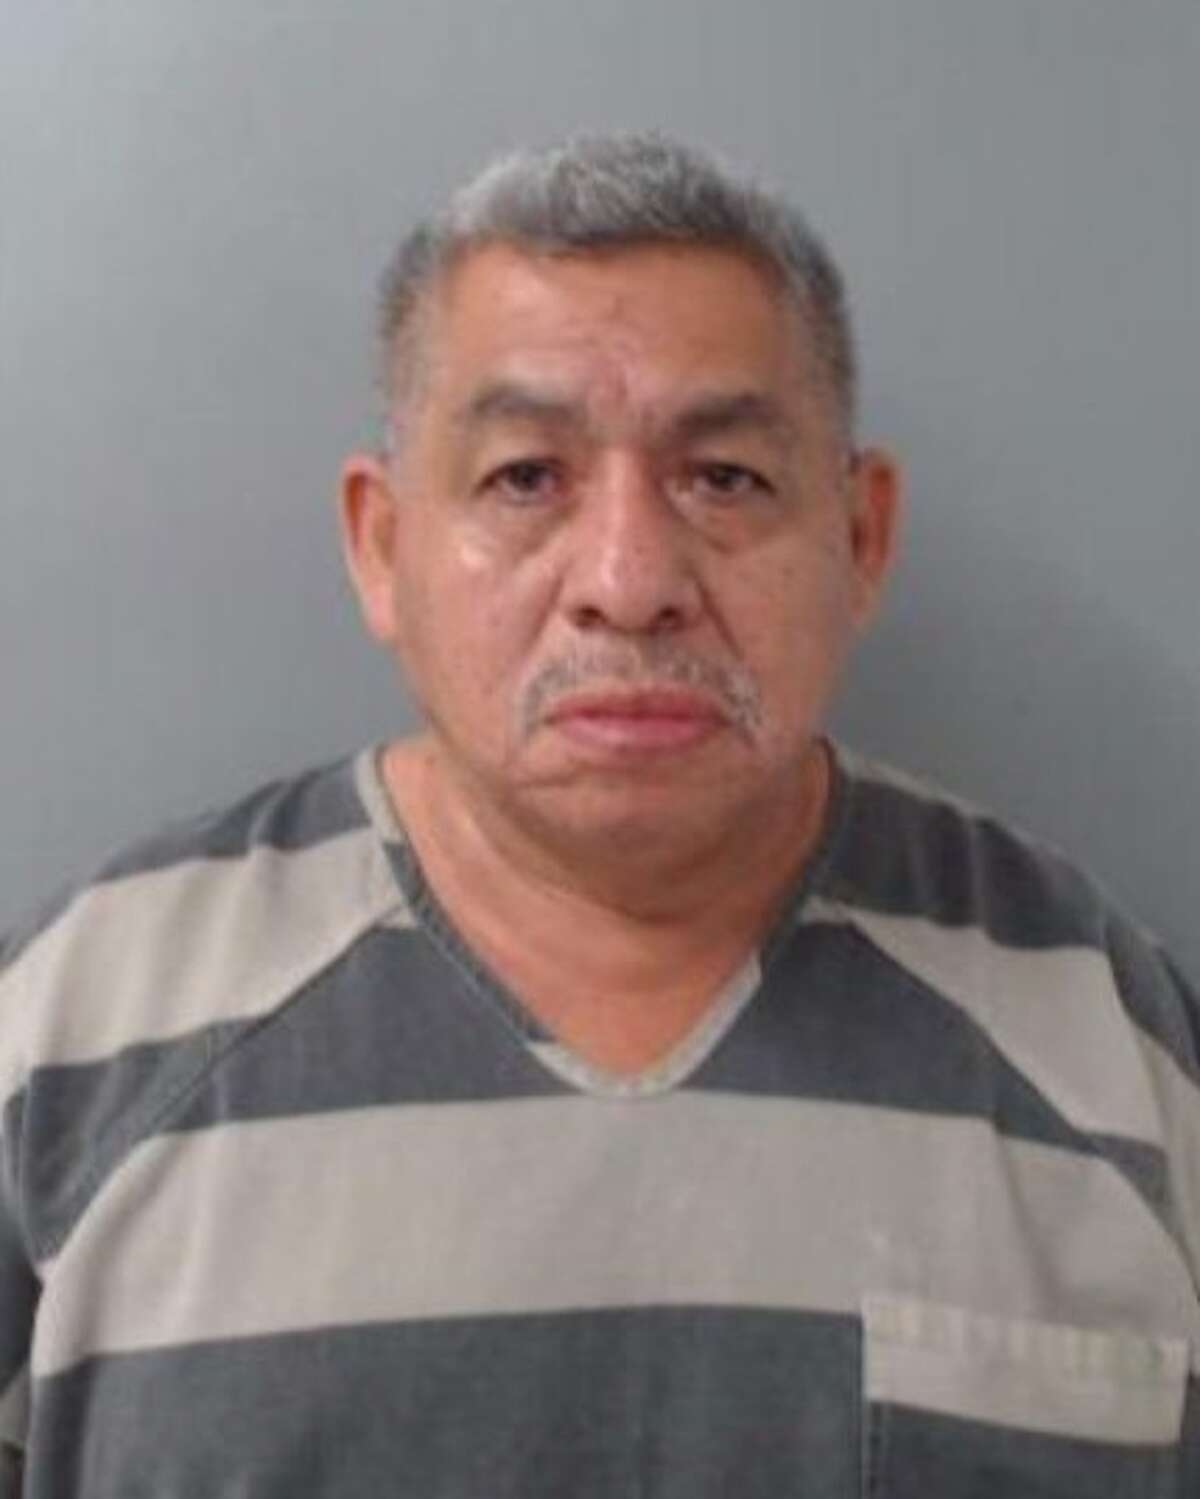 Fernando Gaona-Castillo, 60, and Maria Antonia Marquez-Martinez, 59, were arrested on Thursday July 21, 2022 for allegedly leaving an 8-year-old boy alone in a hot vehicle while shopping at Sam's Club, leading to him needing medical attention.